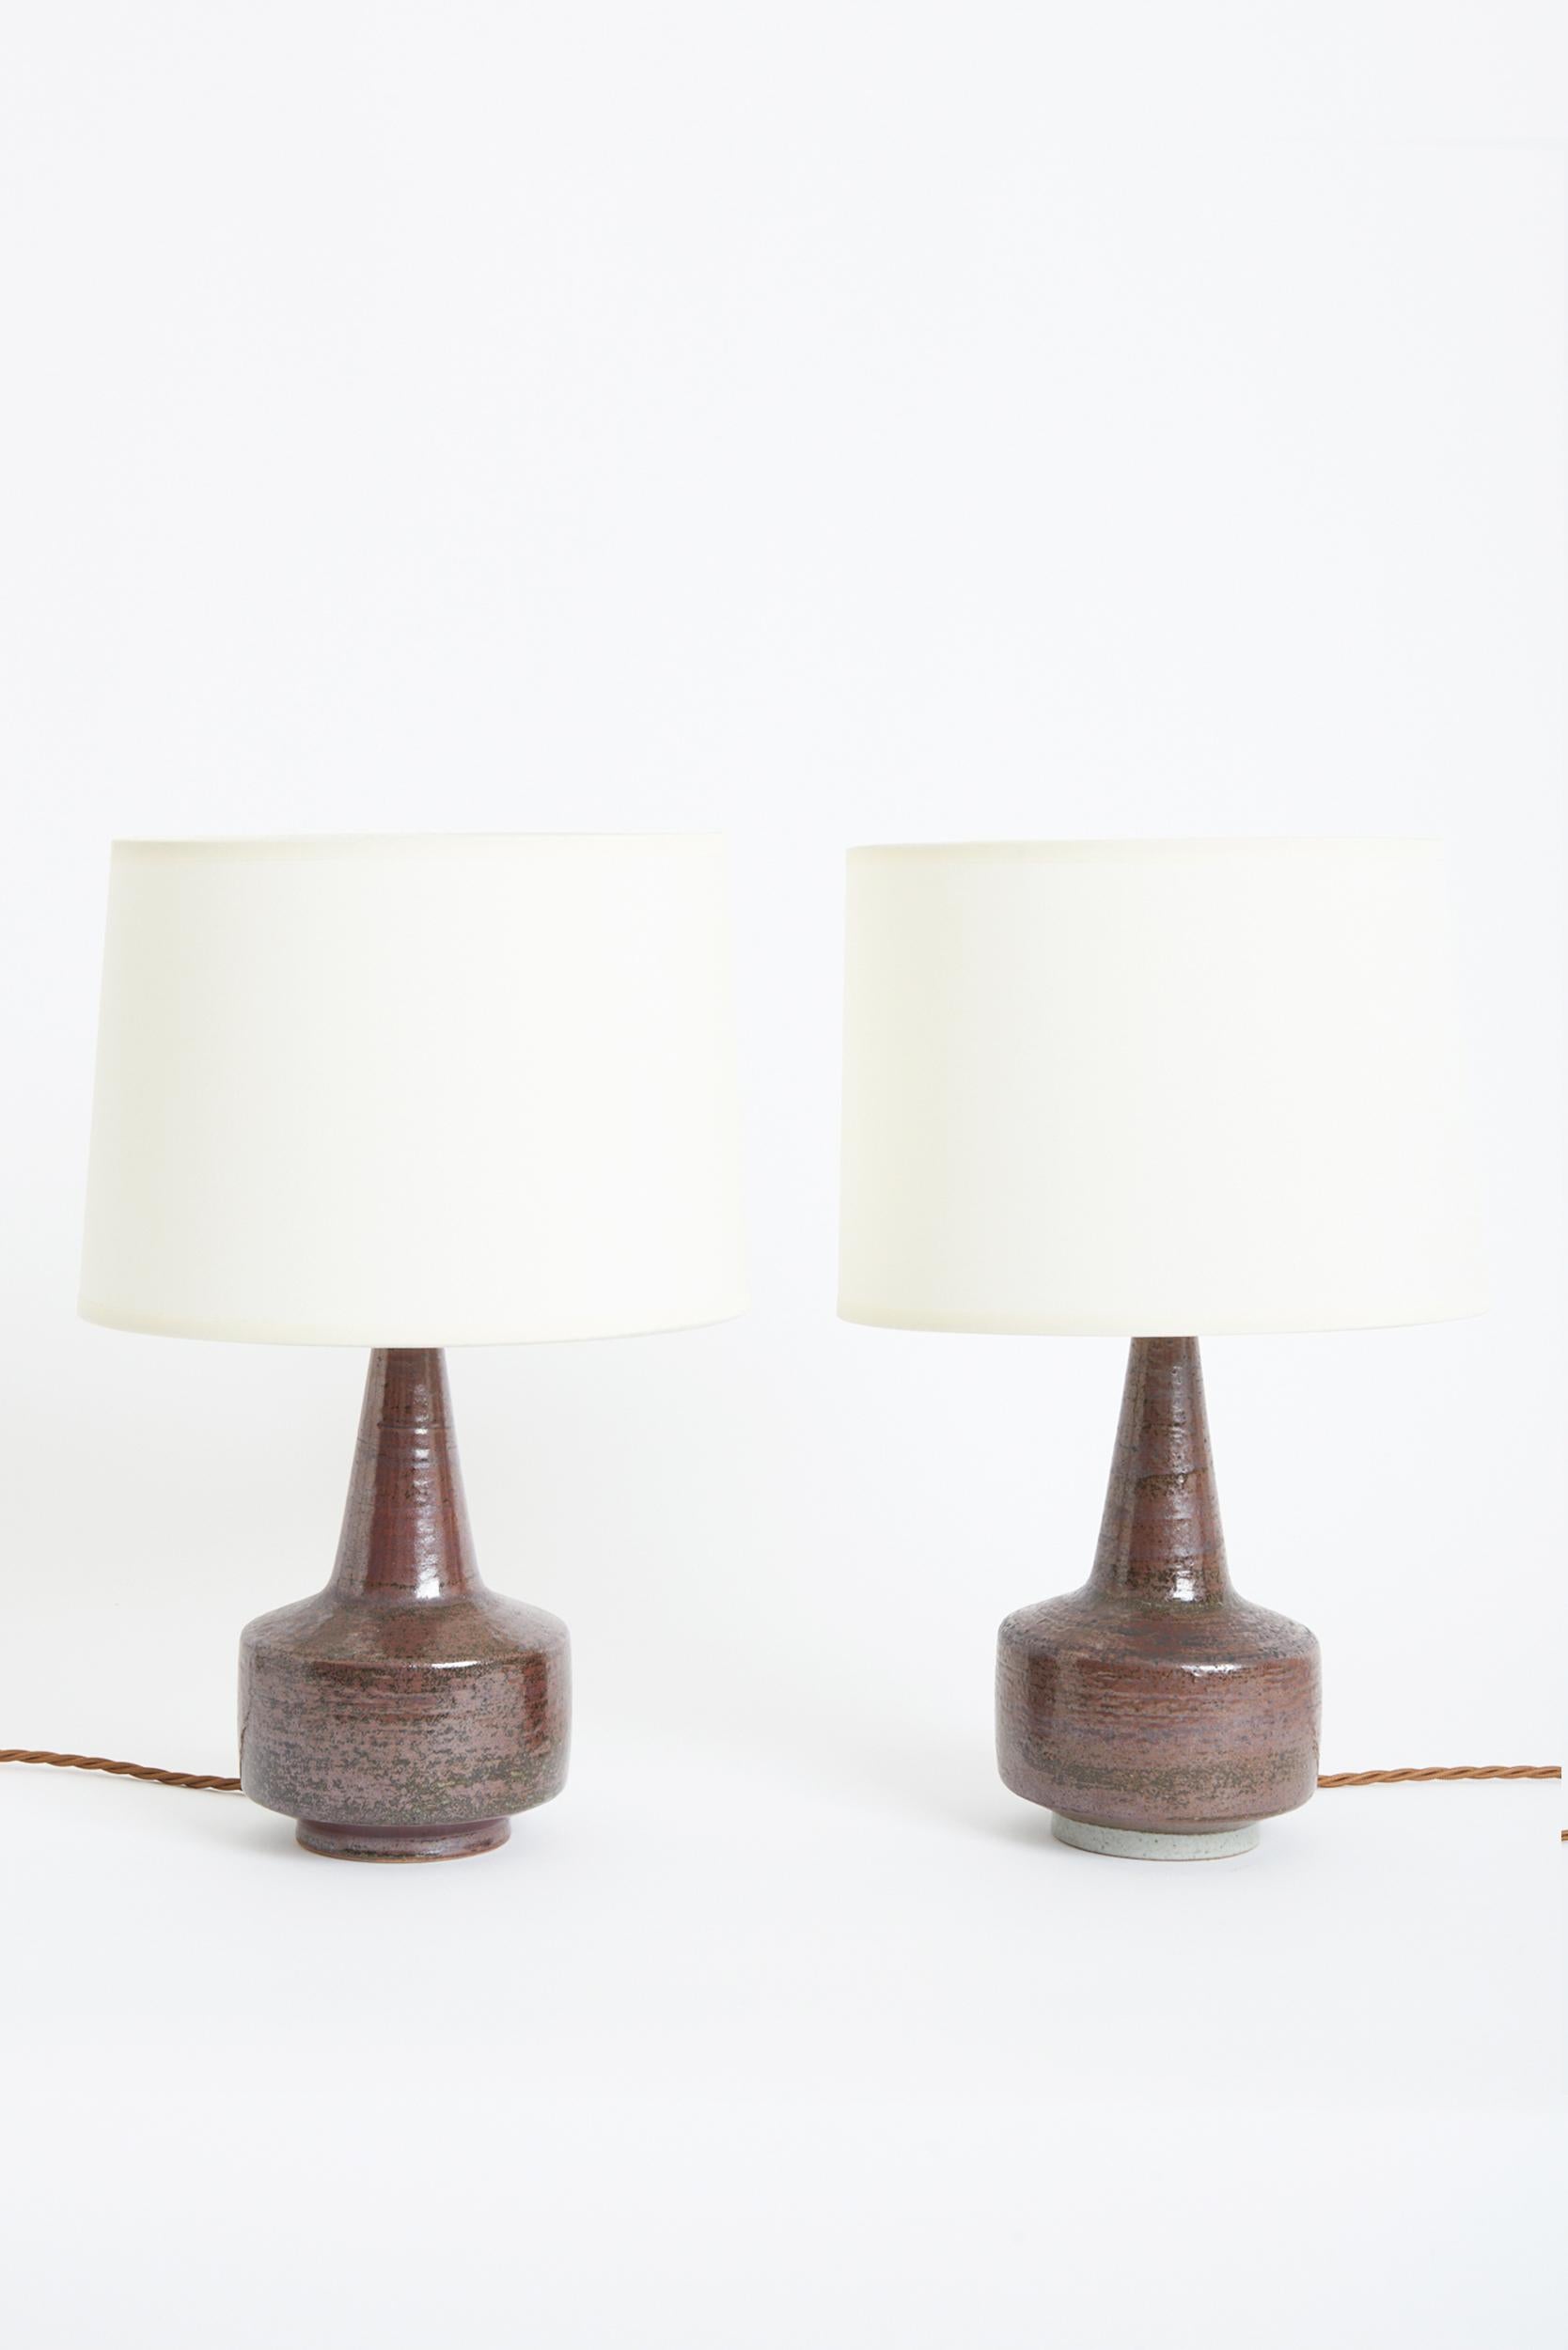 A pair of stoneware table lamps by Per Linnemann-Schmidt (1912 - 1999)
Edited by Palshus, Model DL26. Signed.
Denmark, 1960s
With the shade: 39 cm high by 29 cm diameter
Lamp base only: 27 cm high by 13 cm diameter
---
Per Linnemann (1912-1999) was